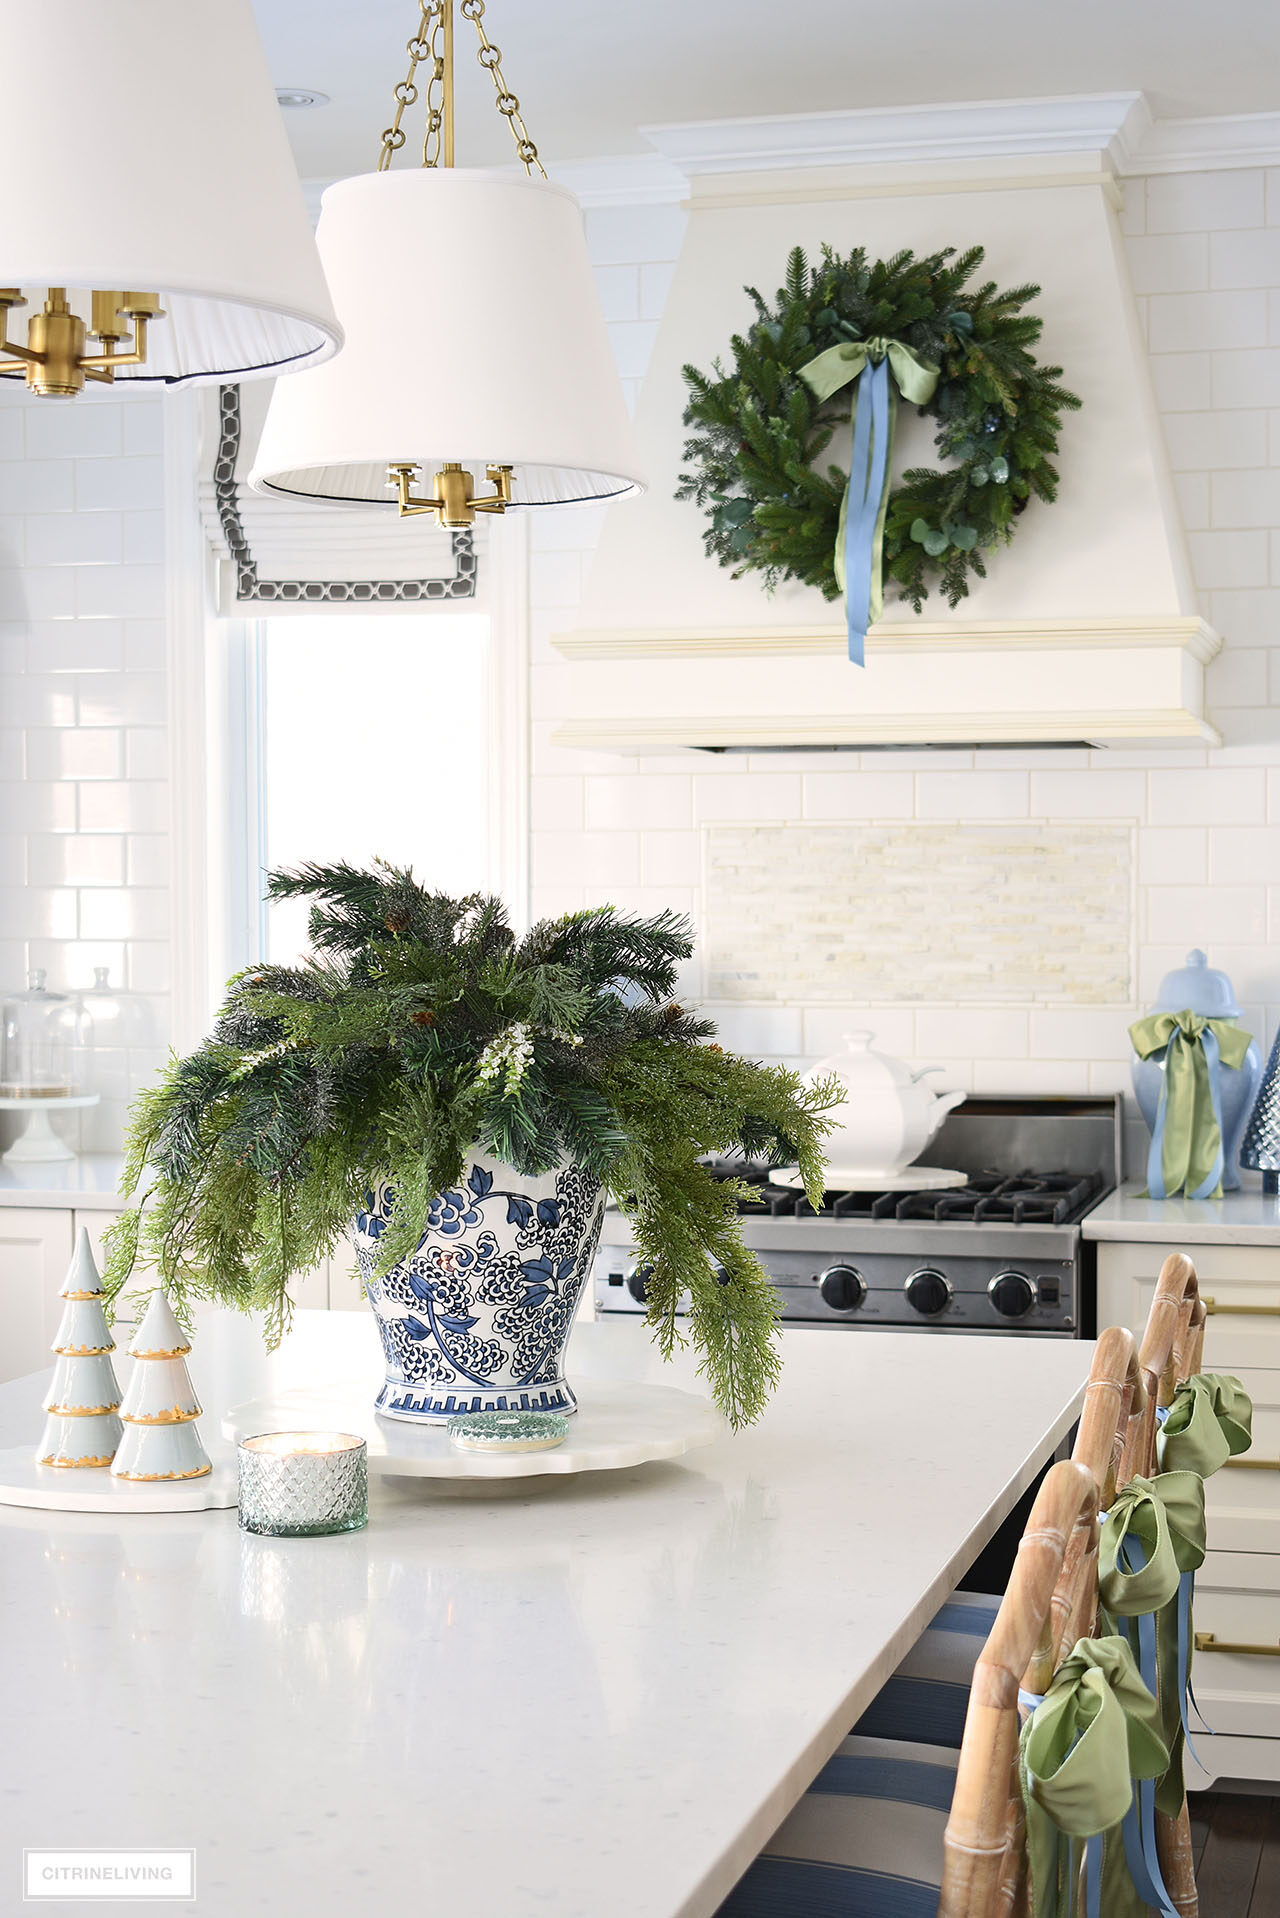 A Christmas vignette on a kitchen island with blue and white ginger jar and greenery arrangement. A beautiful green wreath hangs on the range hood in the background.